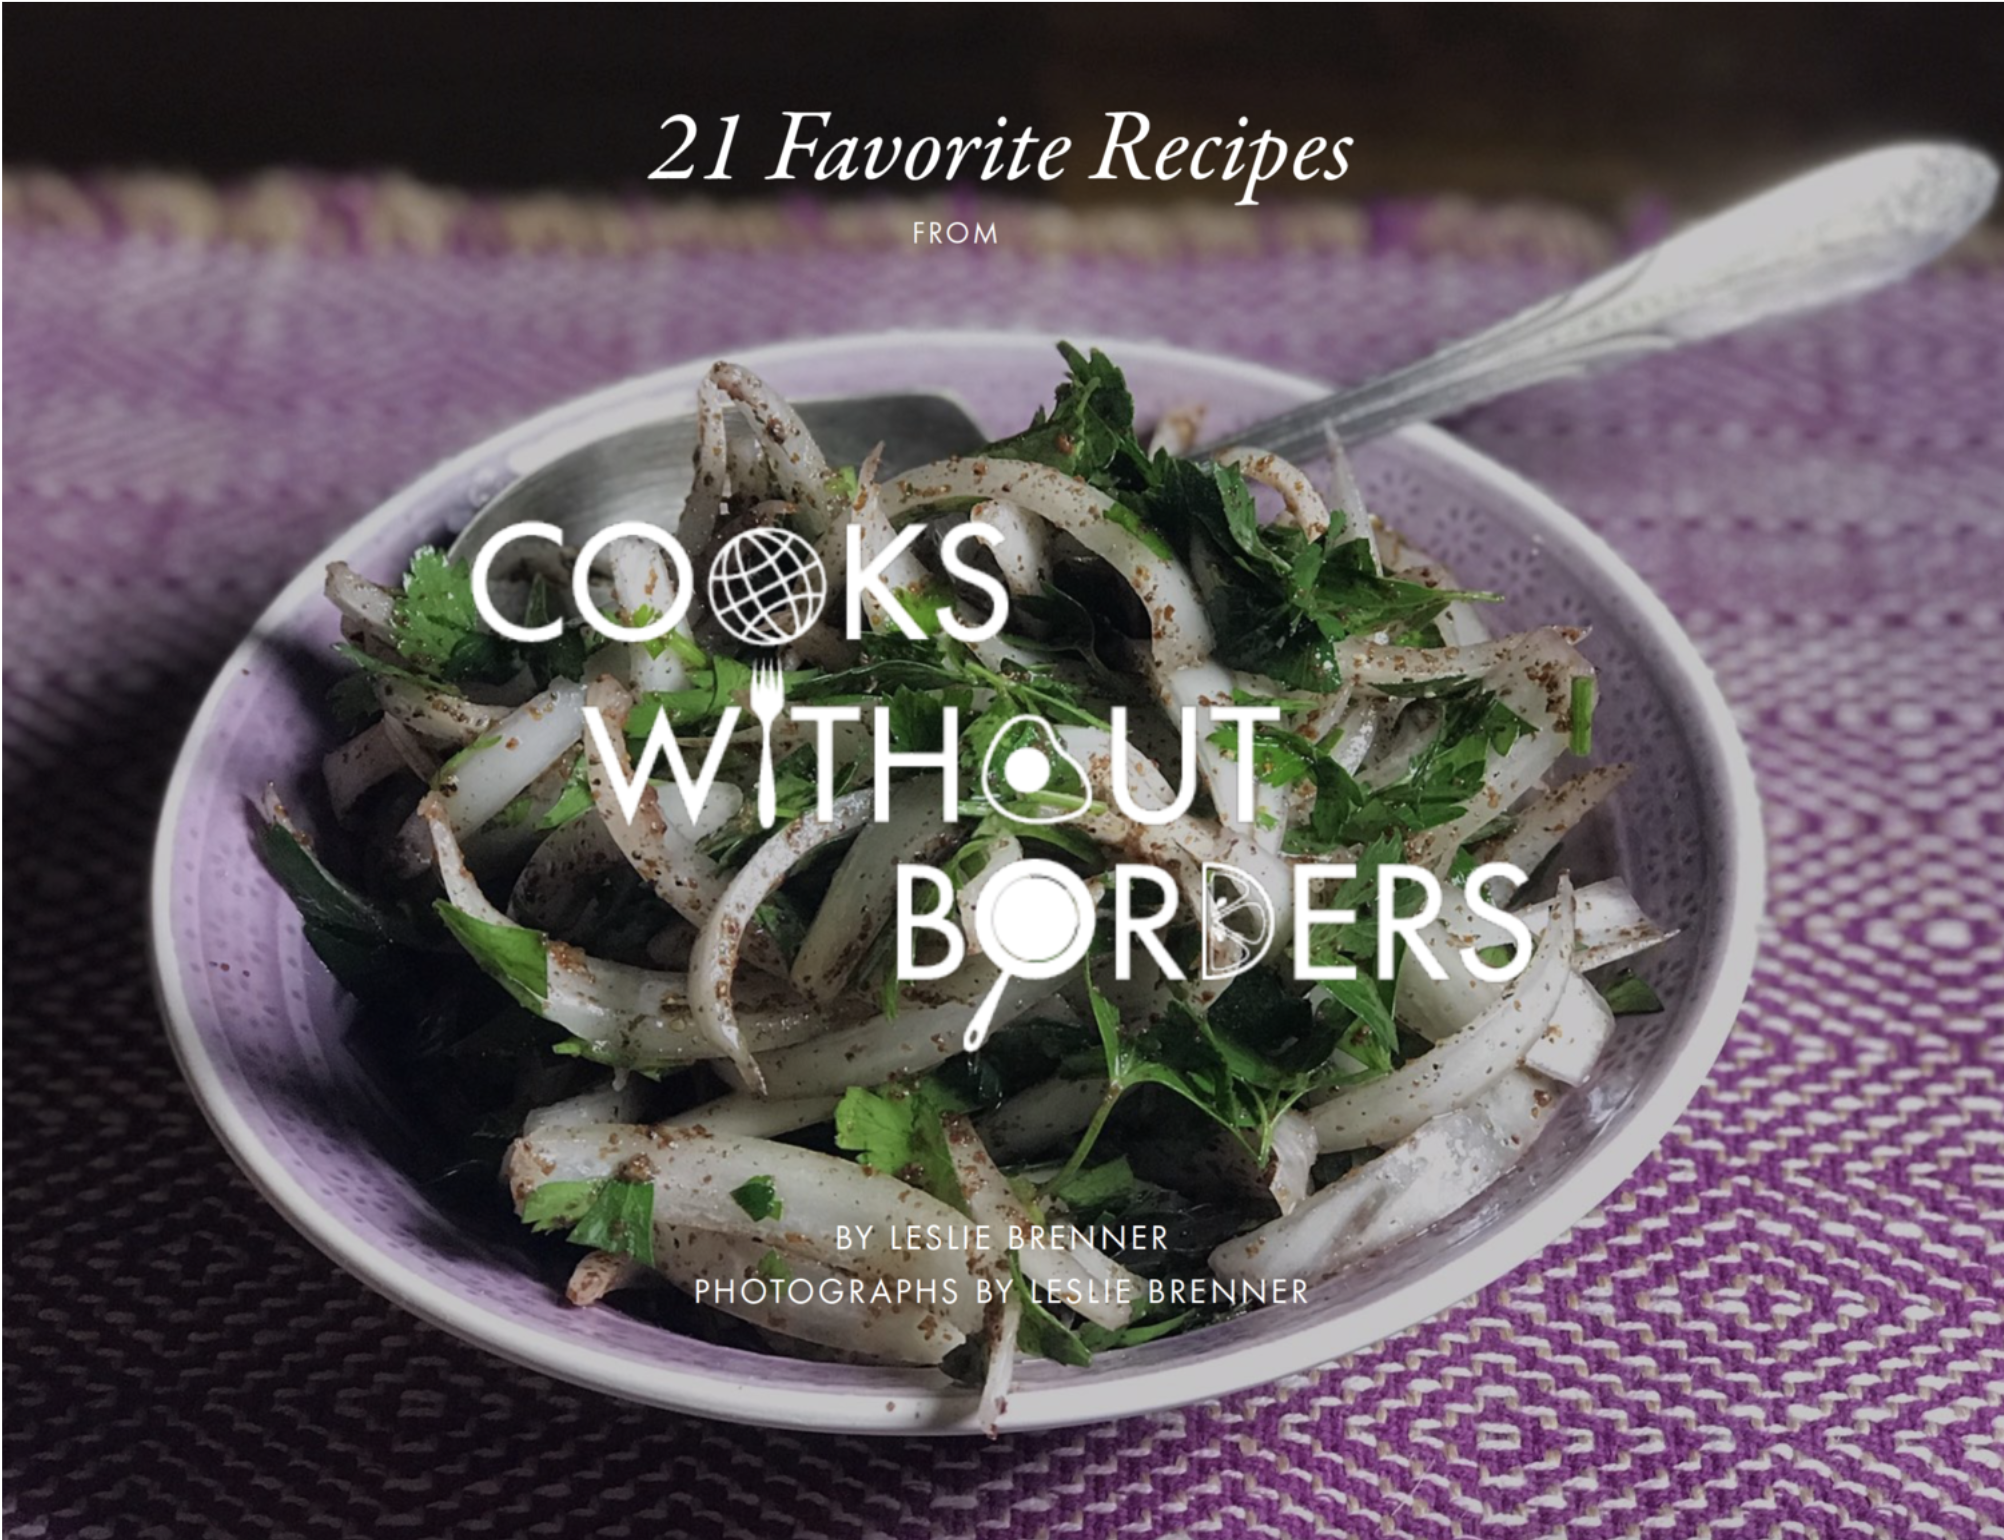 15 Crazy Cookbooks That Are Weirdly Appetizing - Brit + Co